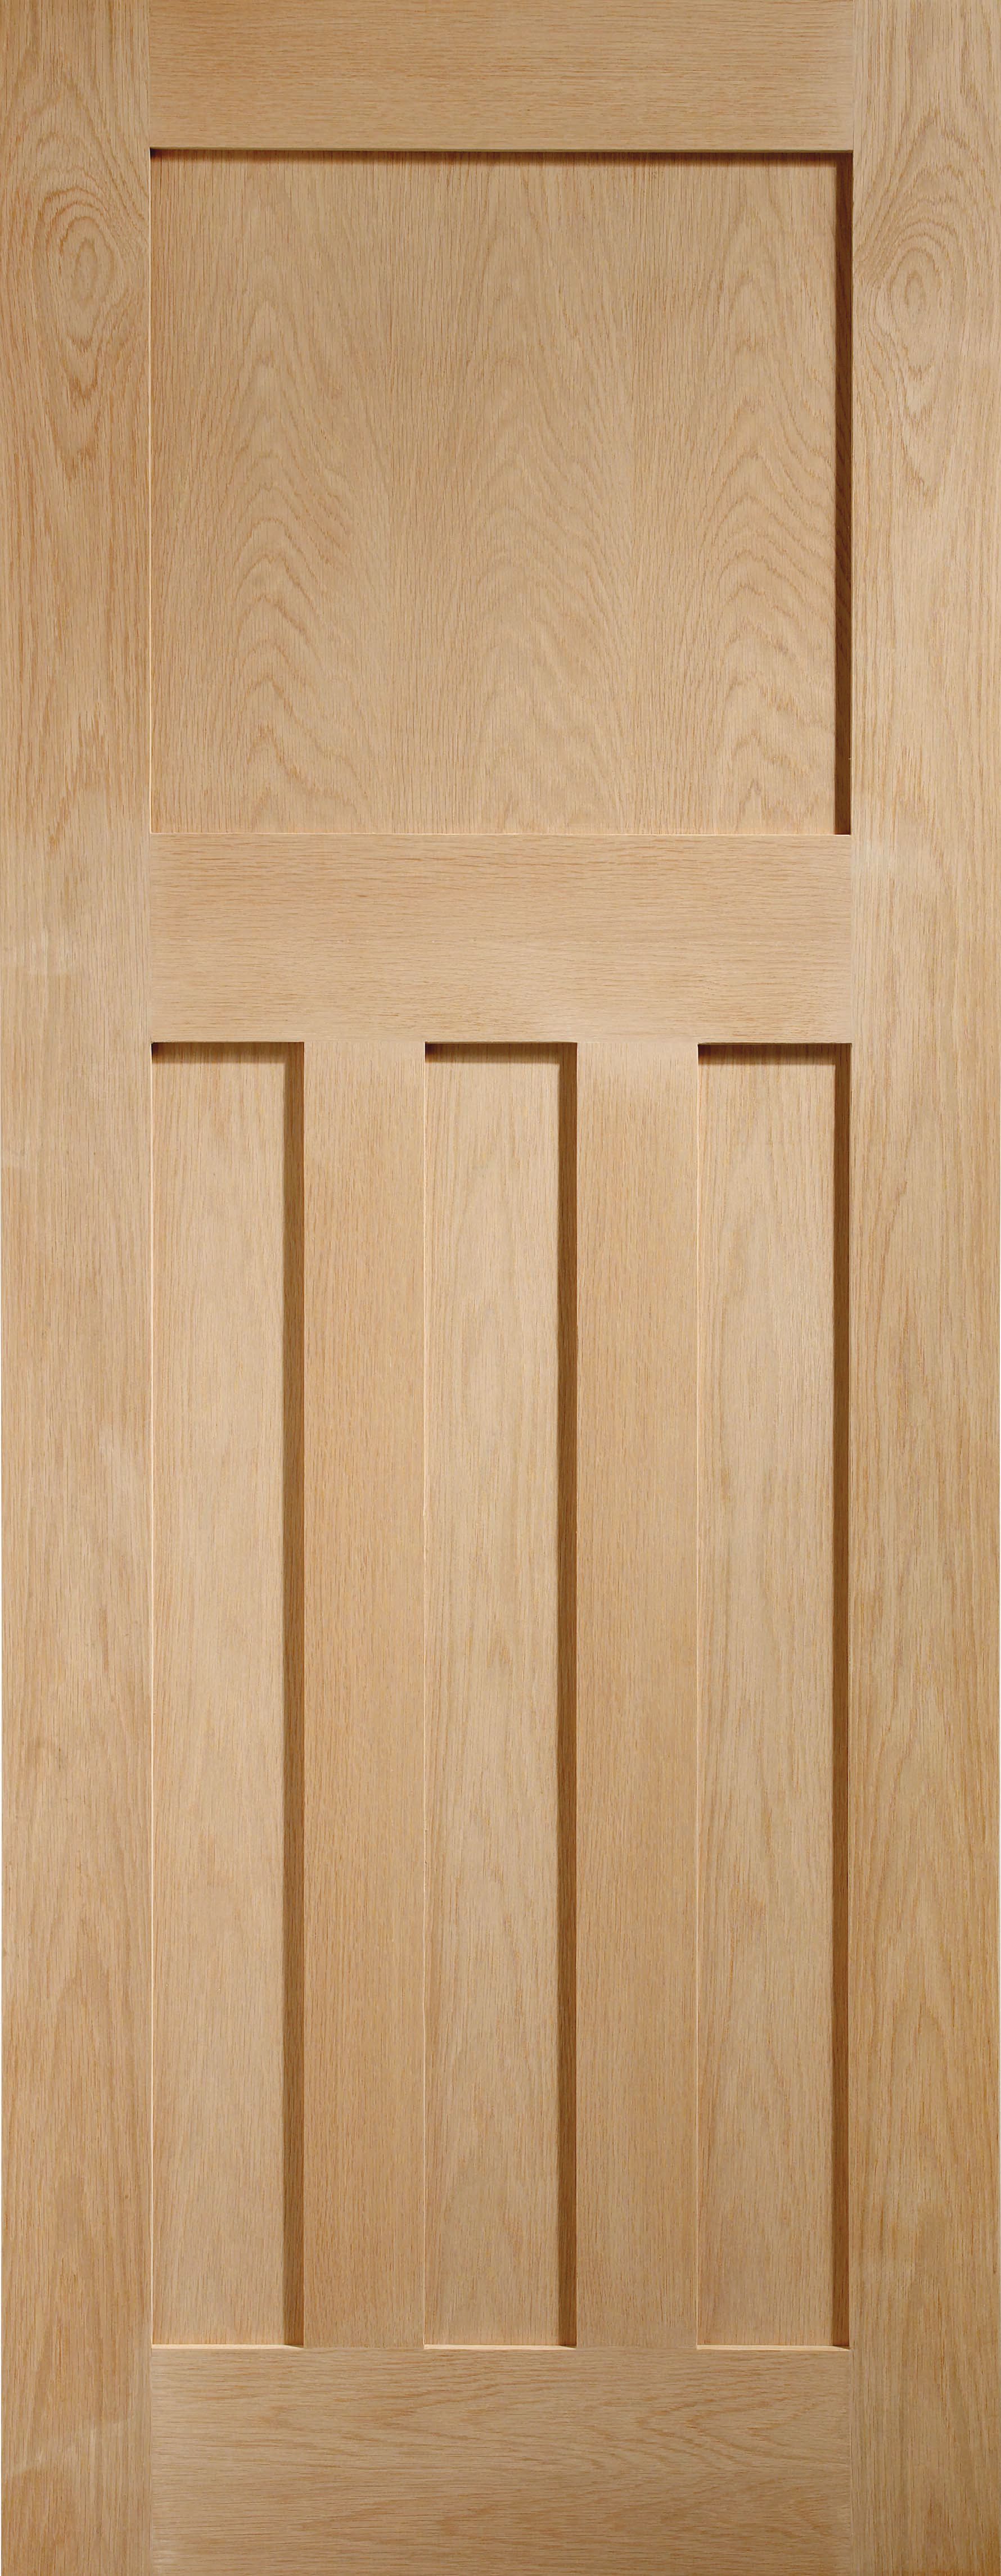 Image of XL Joinery DX 1930s Classic Oak Pre Finished Internal Door - 1981 x 686mm